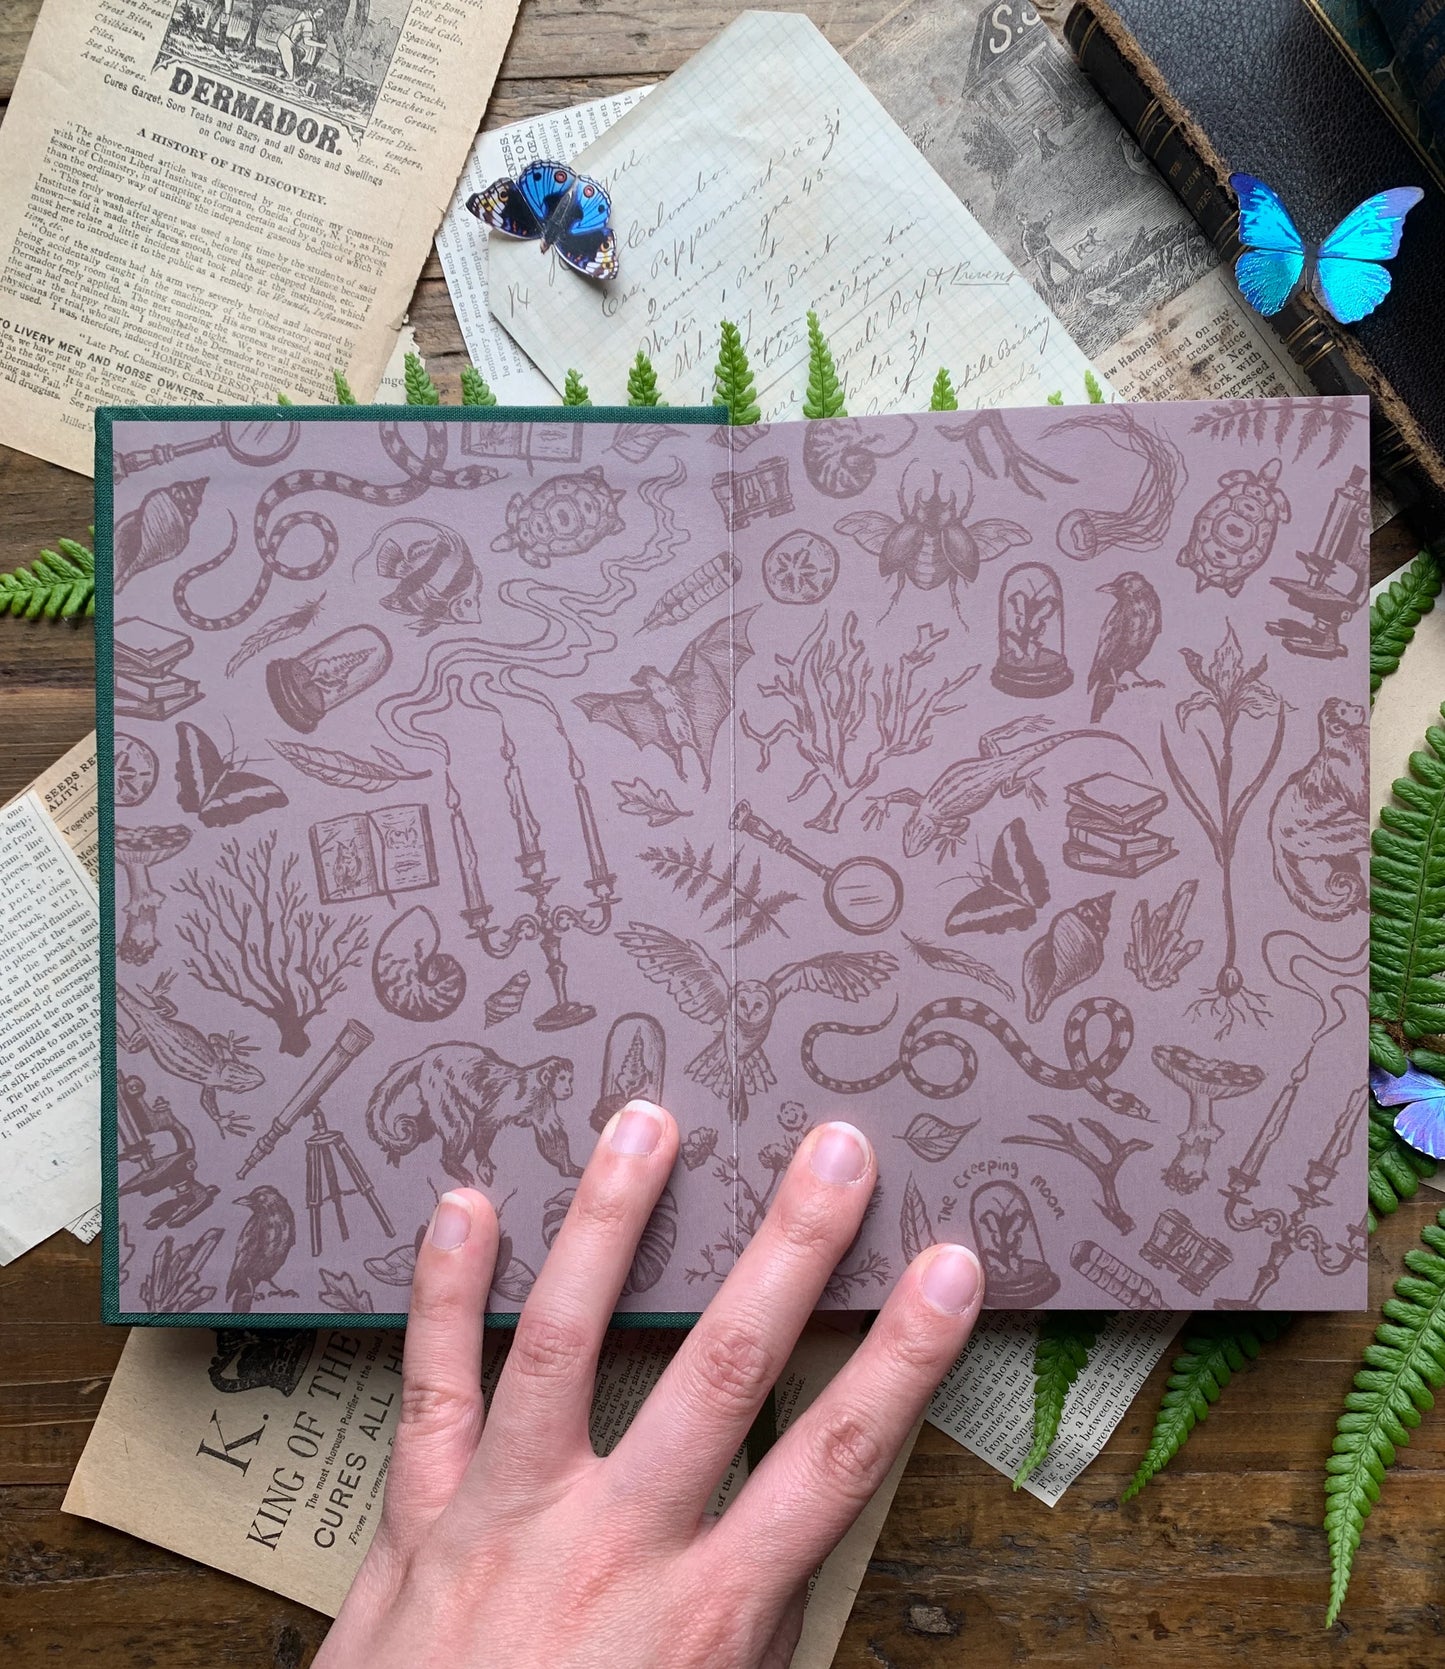 The Creeping Moon "The Botanist" Notebook